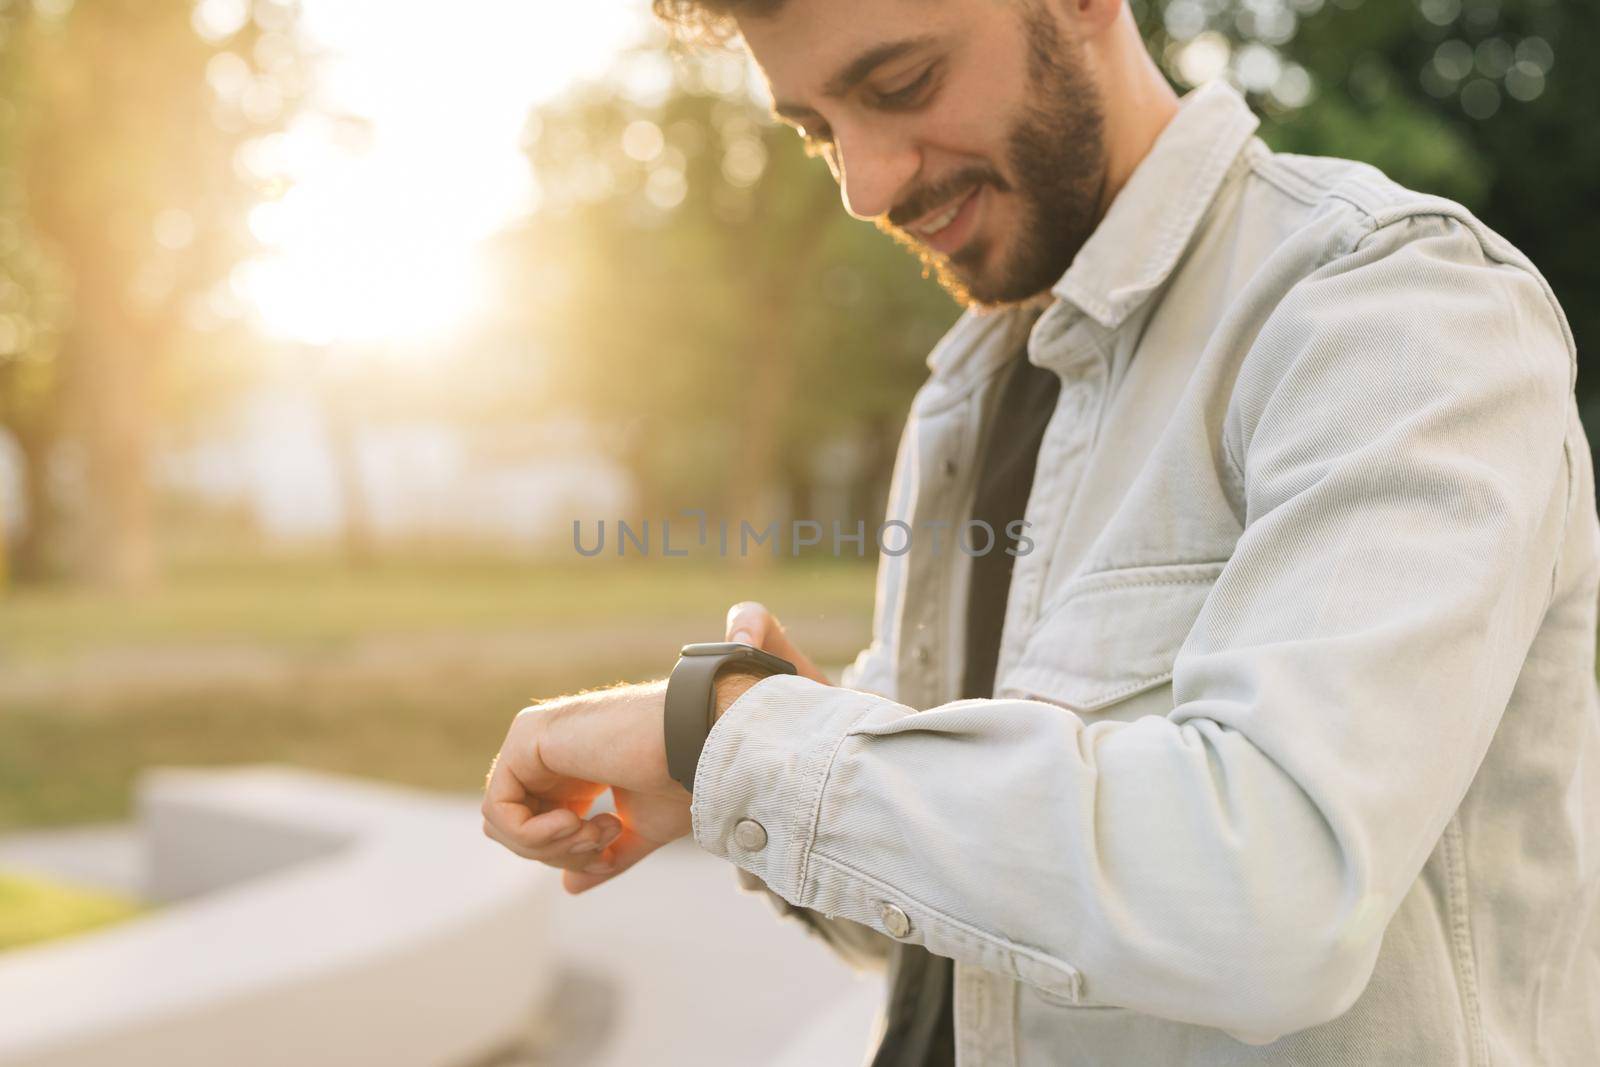 Smartwatch. Smartwatch on a man's hand outdoor. Man's hand touching a smart watch. Closeup shot of male's hand uses of wearable smart watch at outdoor.